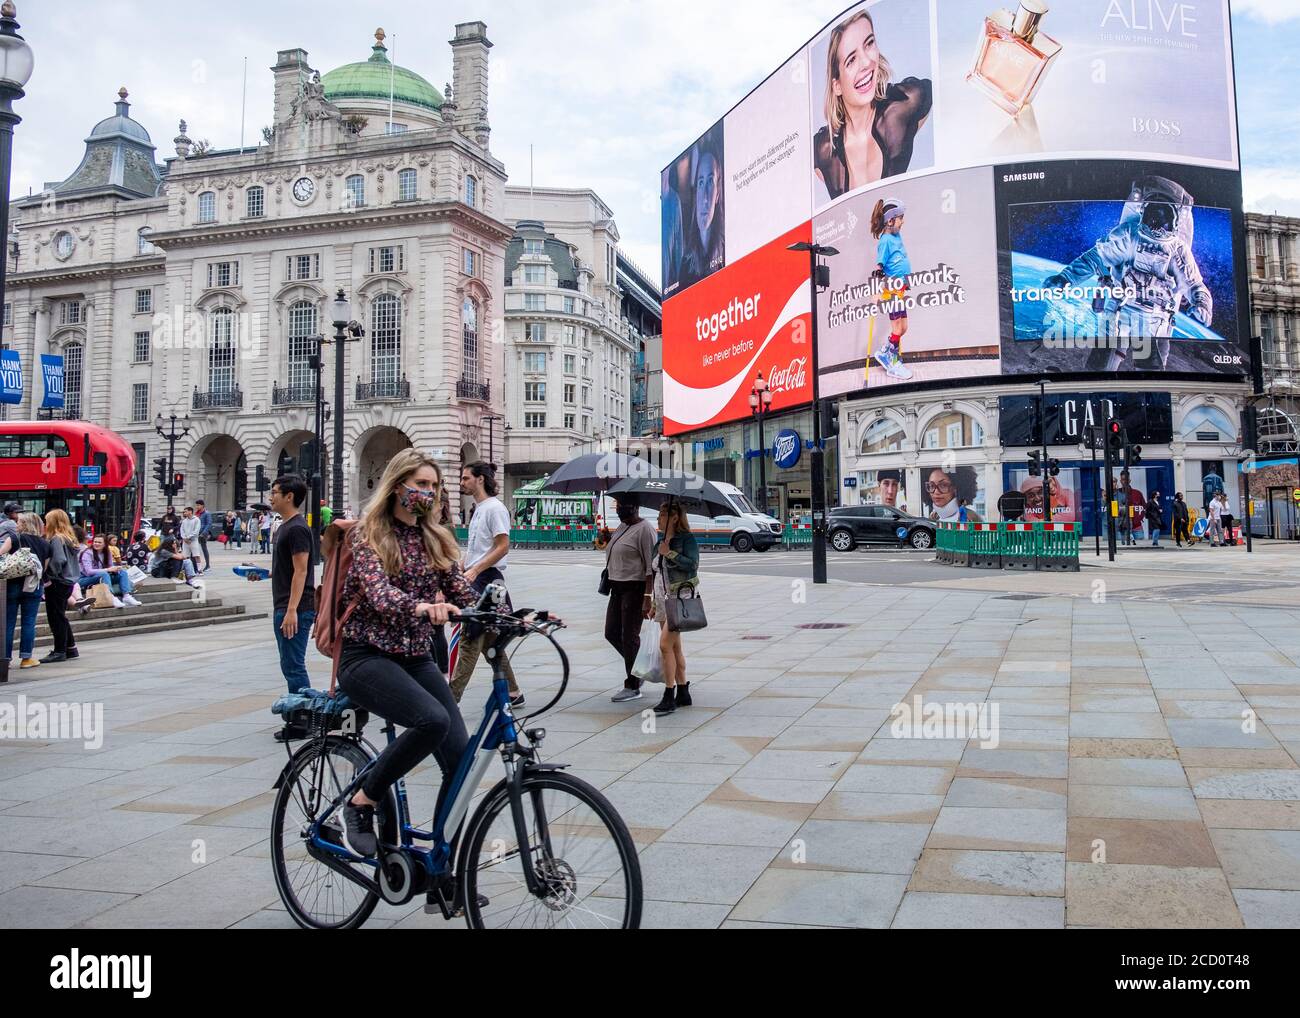 London- August, 2020: Quiet London street scene on Piccadilly Circus, nearly empty due to the effects of the coronavirus Stock Photo